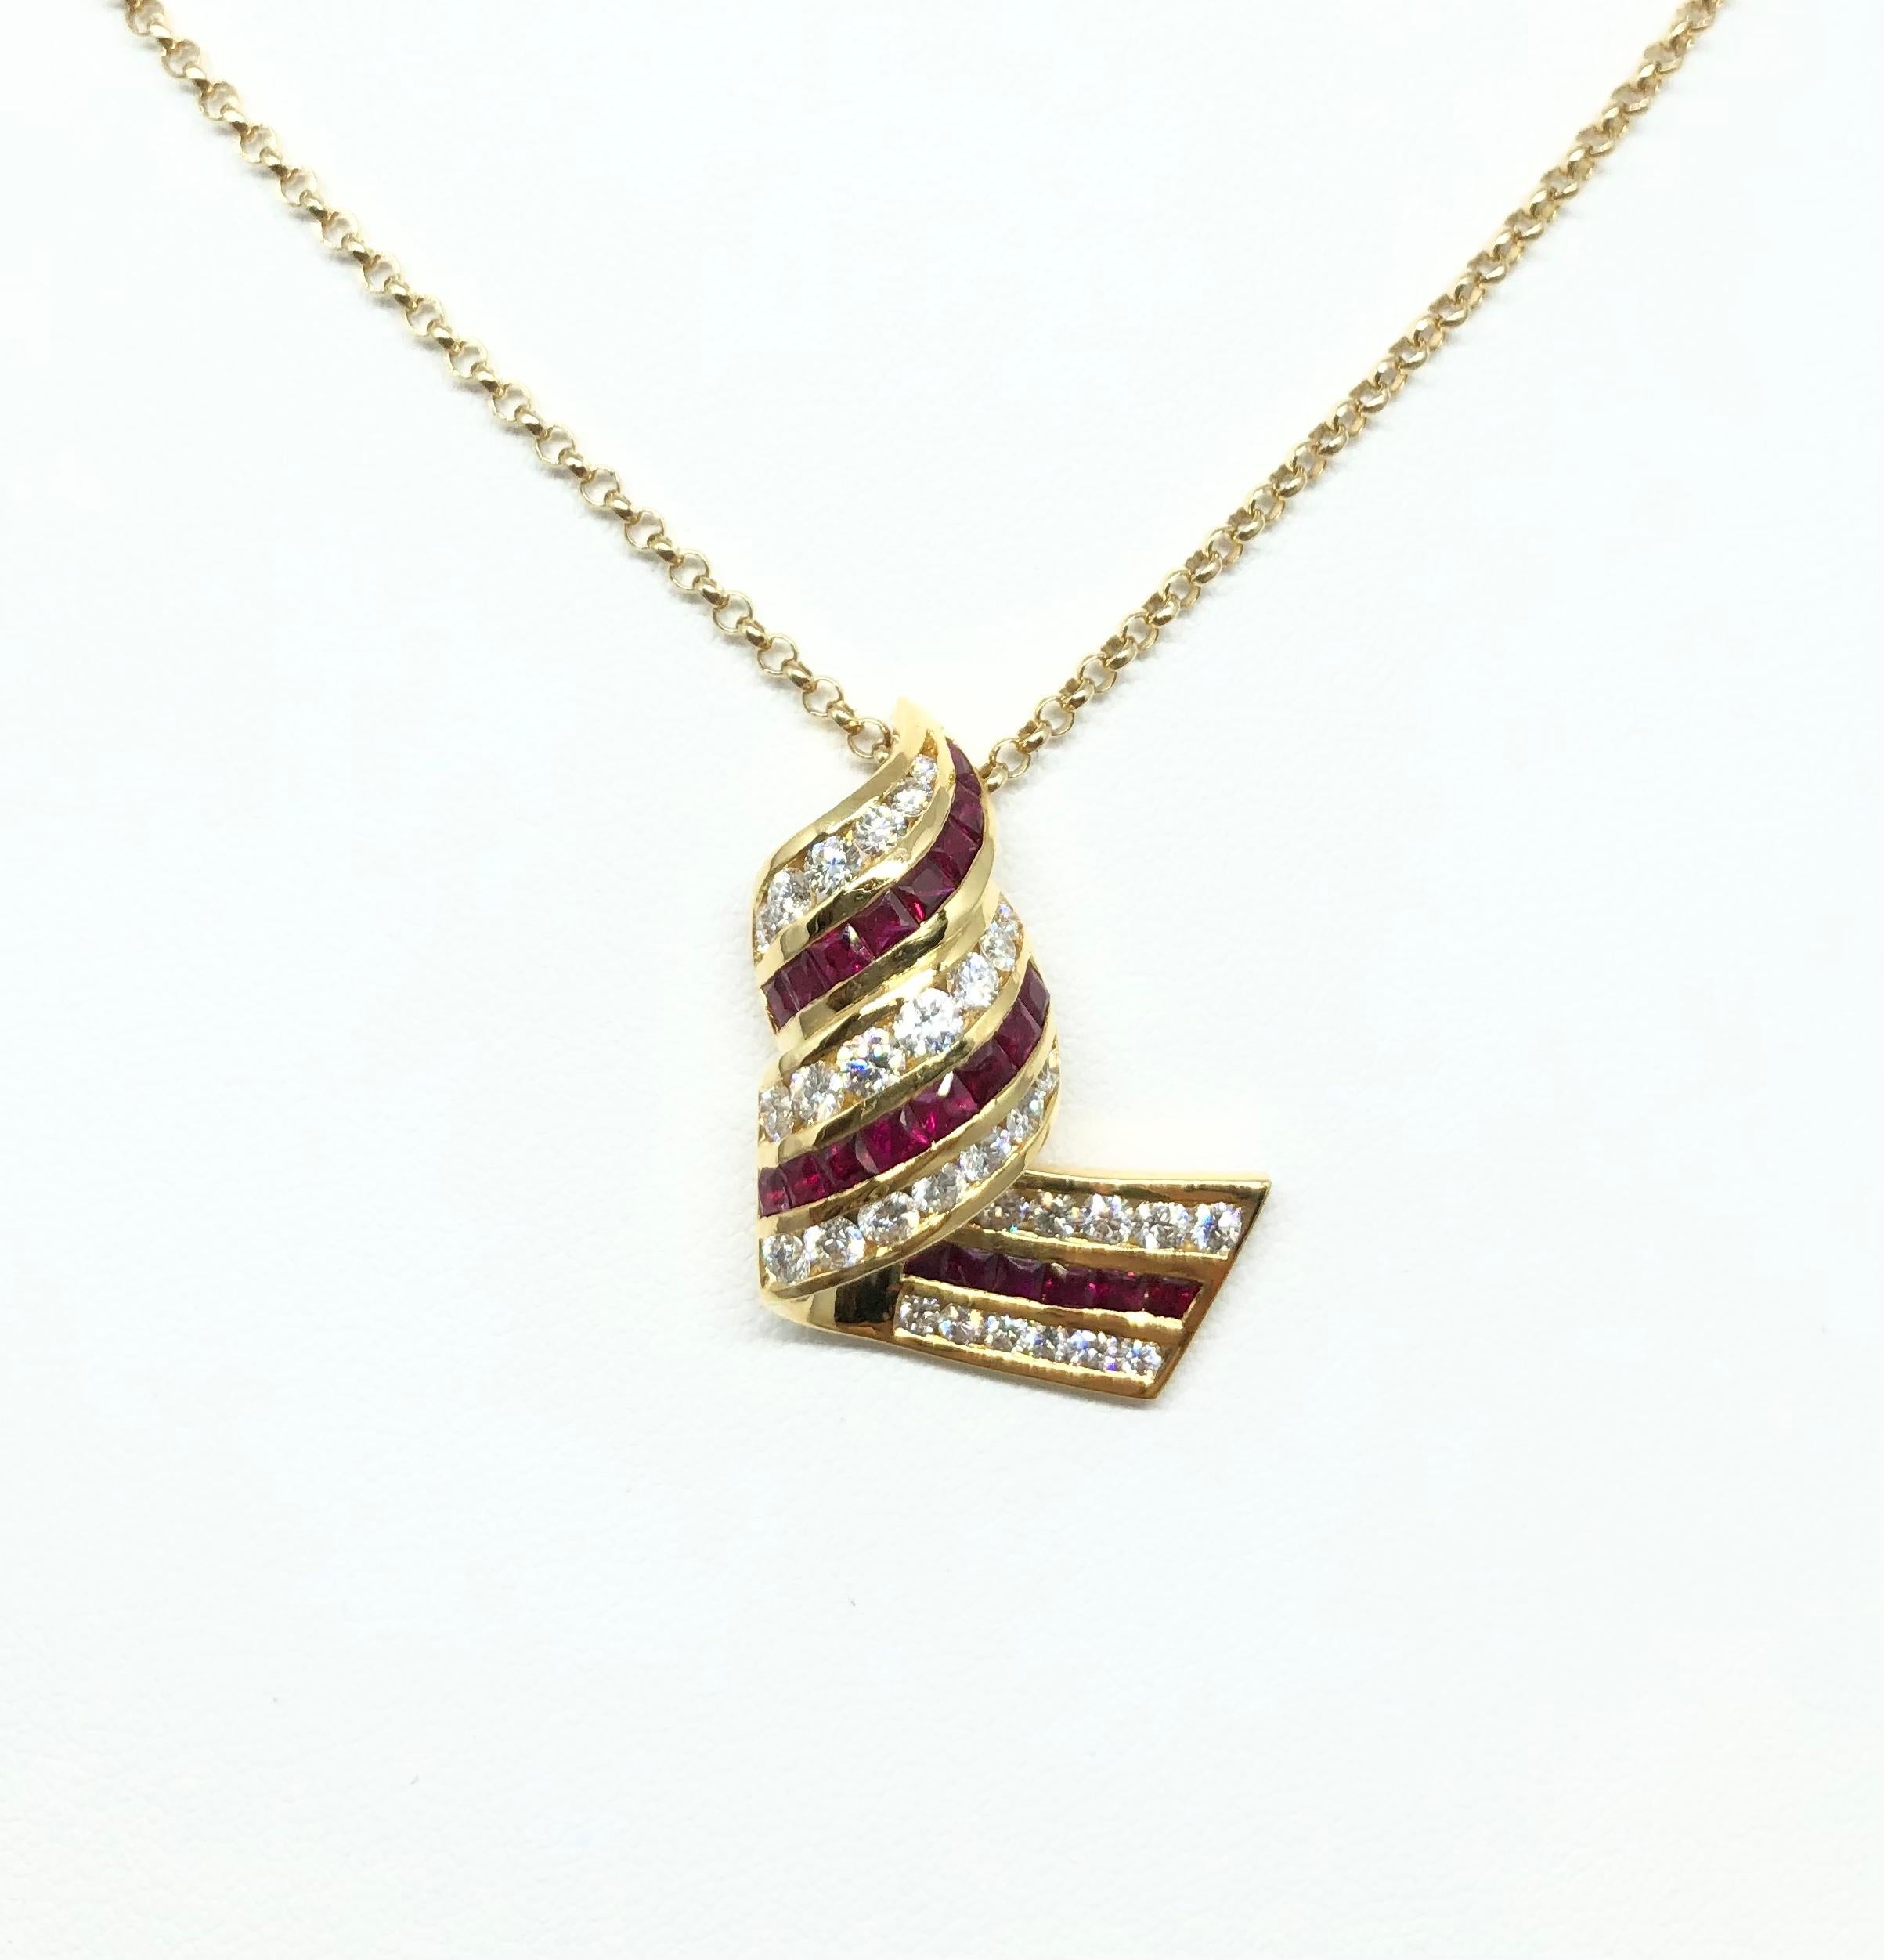 Ruby 1.19 carats with Diamond 1.02 carat Pendant set in 18 Karat Gold Settings
(chain not included)

Width: 2.0 cm 
Length: 2.6  cm
Total Weight: 6.48 grams

